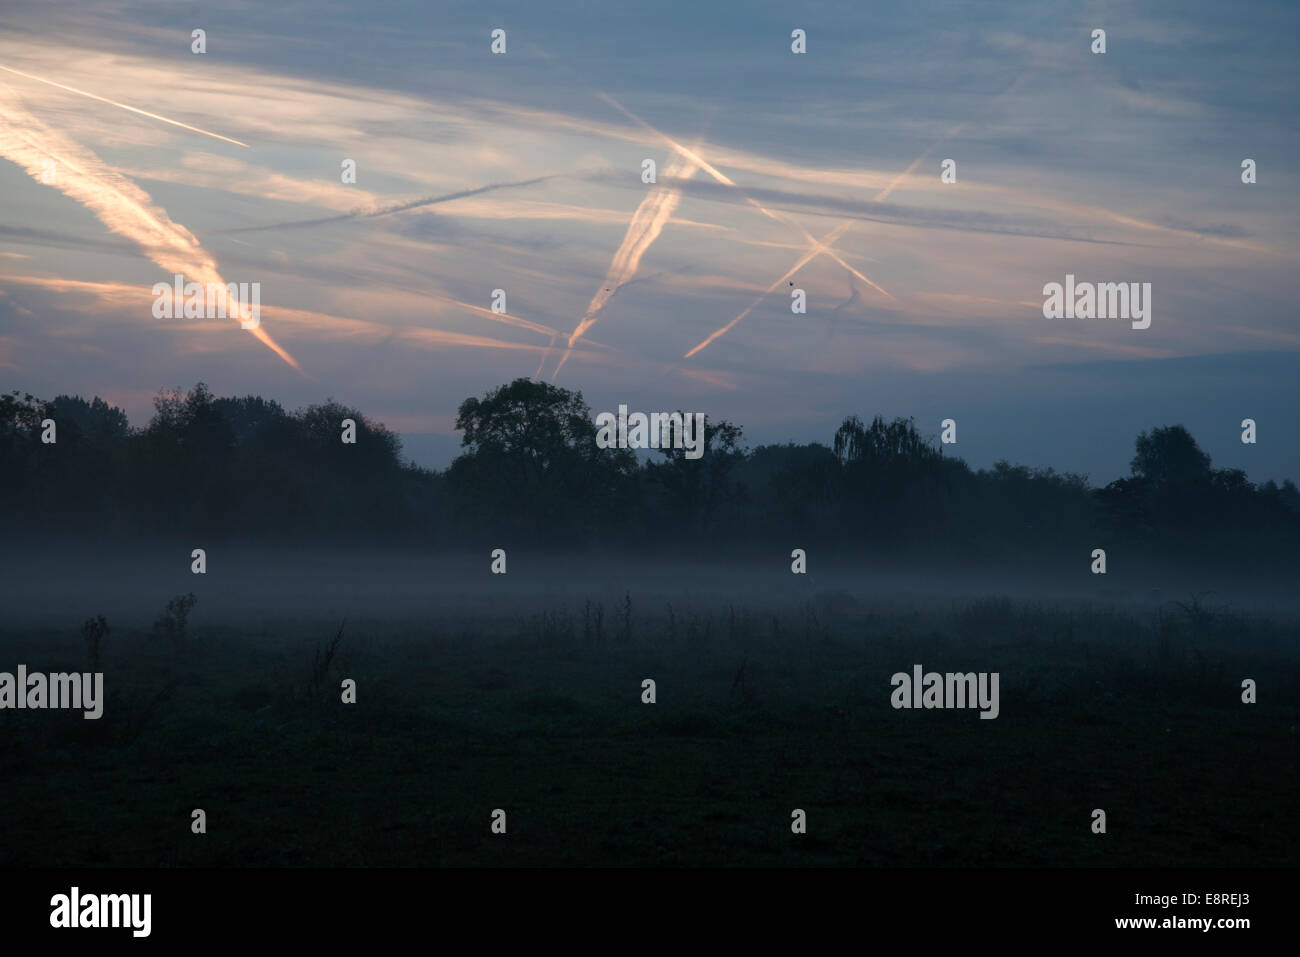 October 2014: Early morning misty landscape with aircraft contrails in blue sky. In Oxford, England Stock Photo